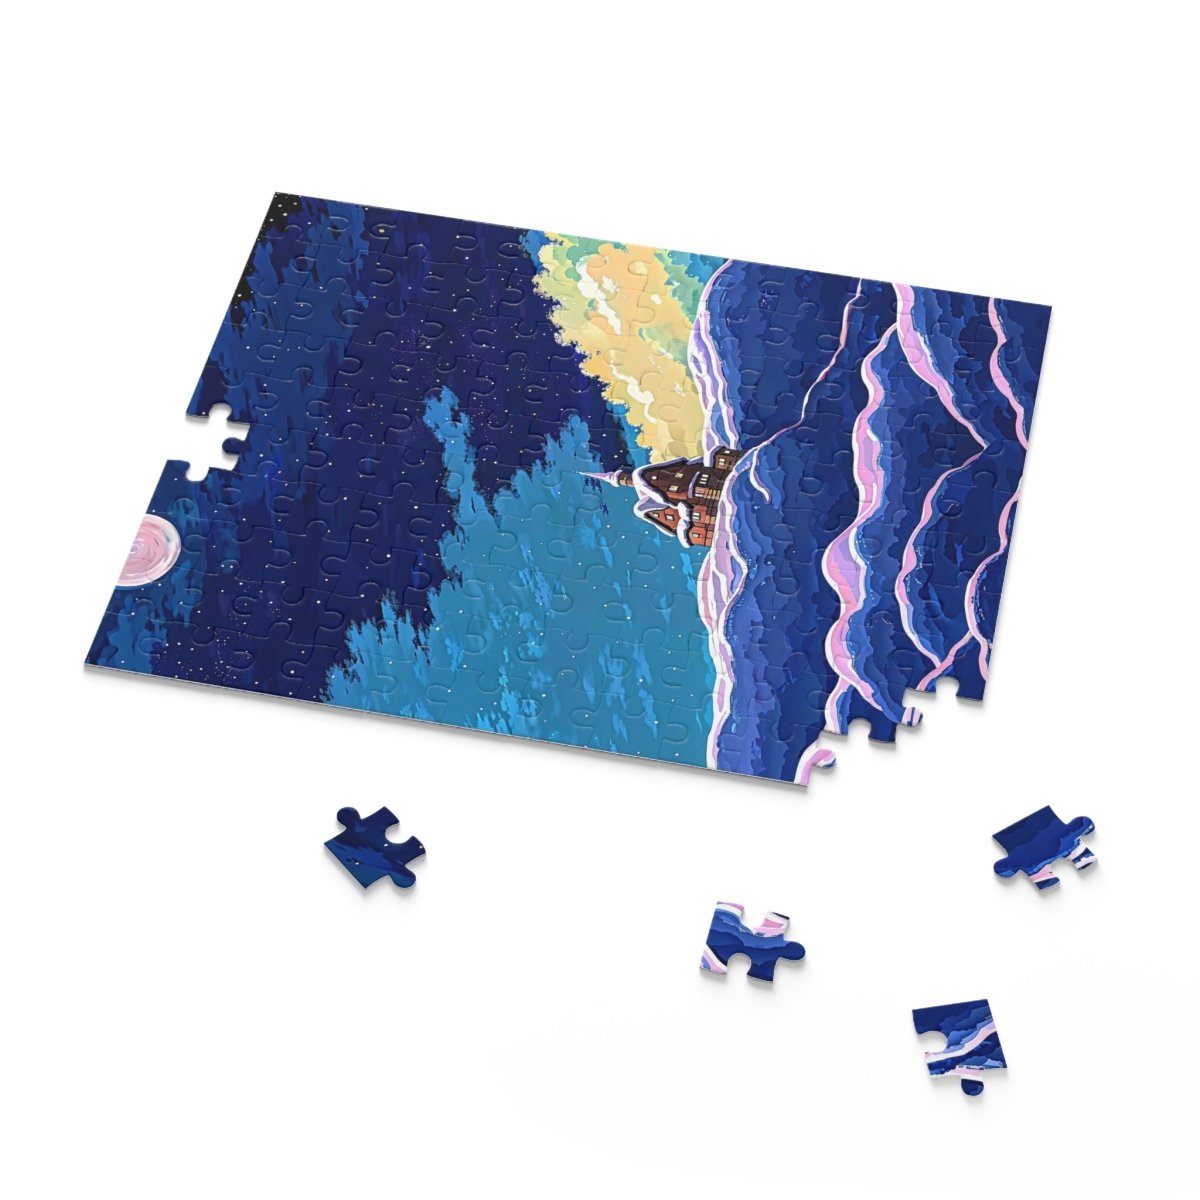 Tiny comfort - Puzzle - Puzzle - Ever colorful